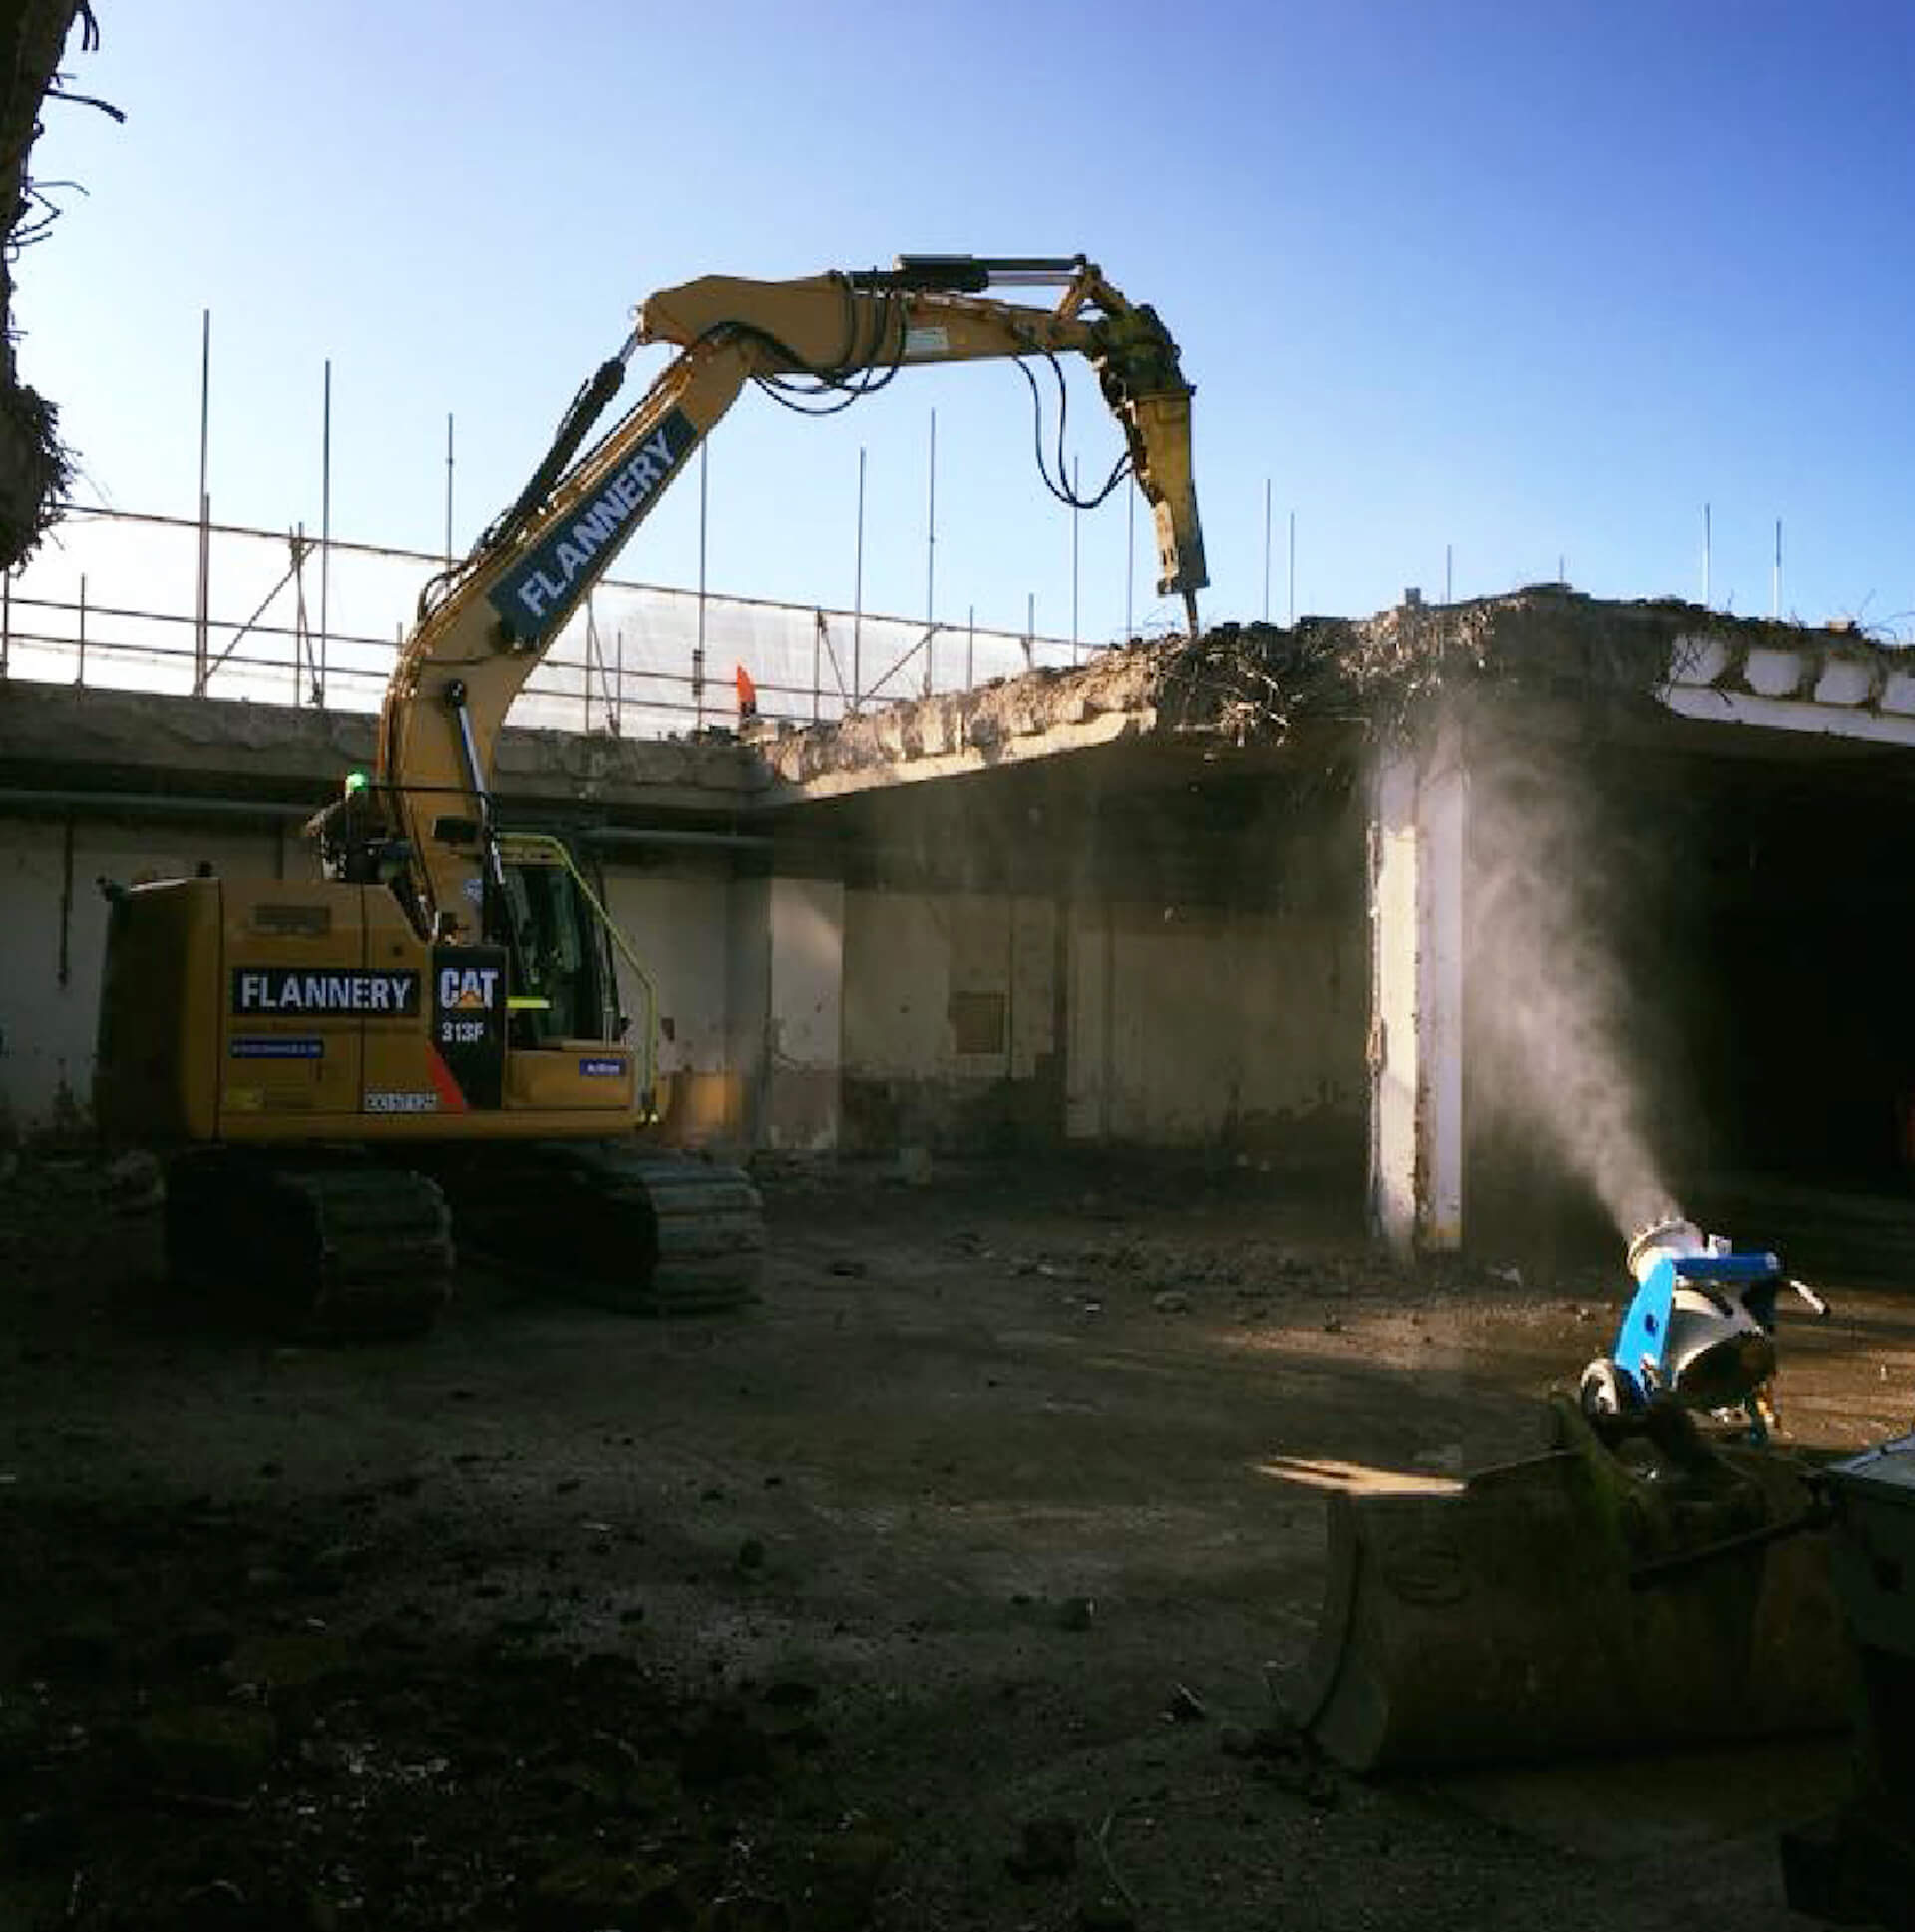 A machine breaking the concrete out of a roof. A water bowser in the foreground to reduce dust.